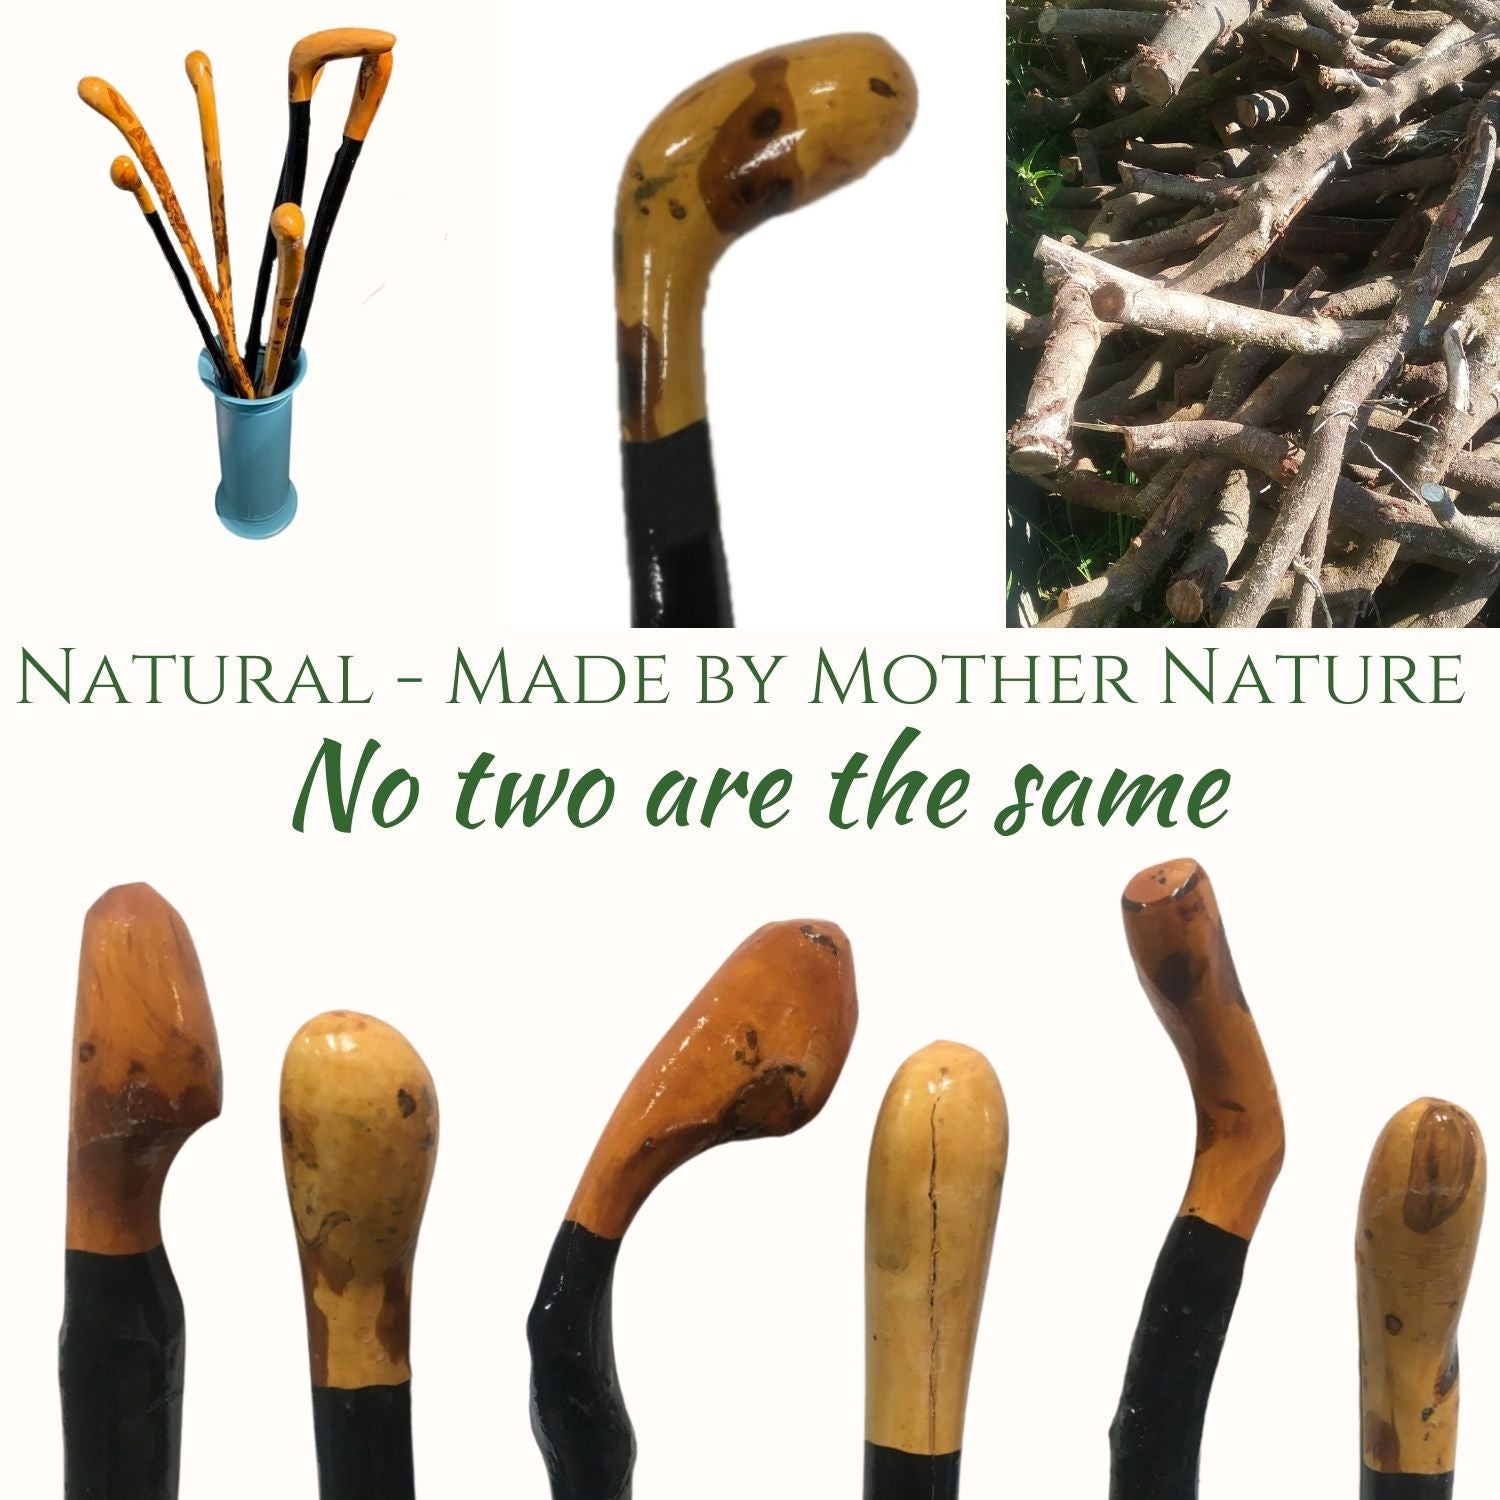 Blackthorn Walking Stick Limited Supply Natural Product Made in Ireland